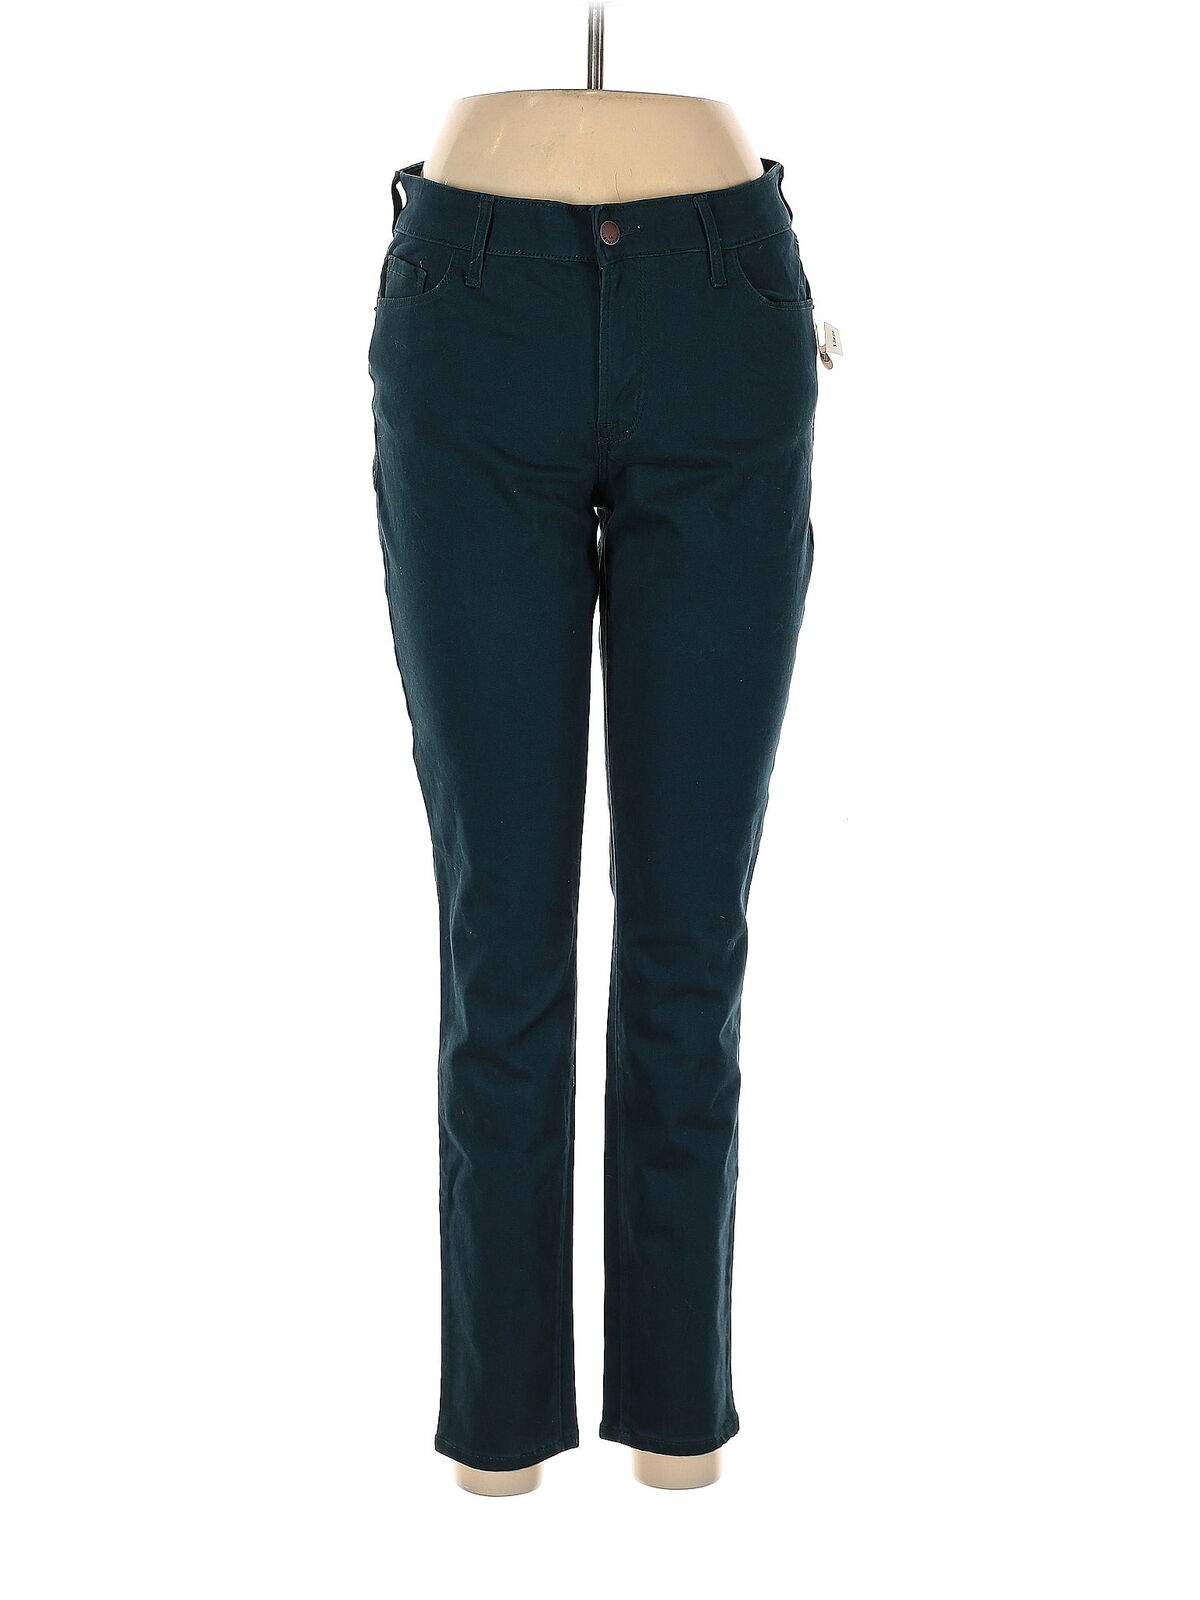 Old Navy Women Green Jeans 8 - image 1